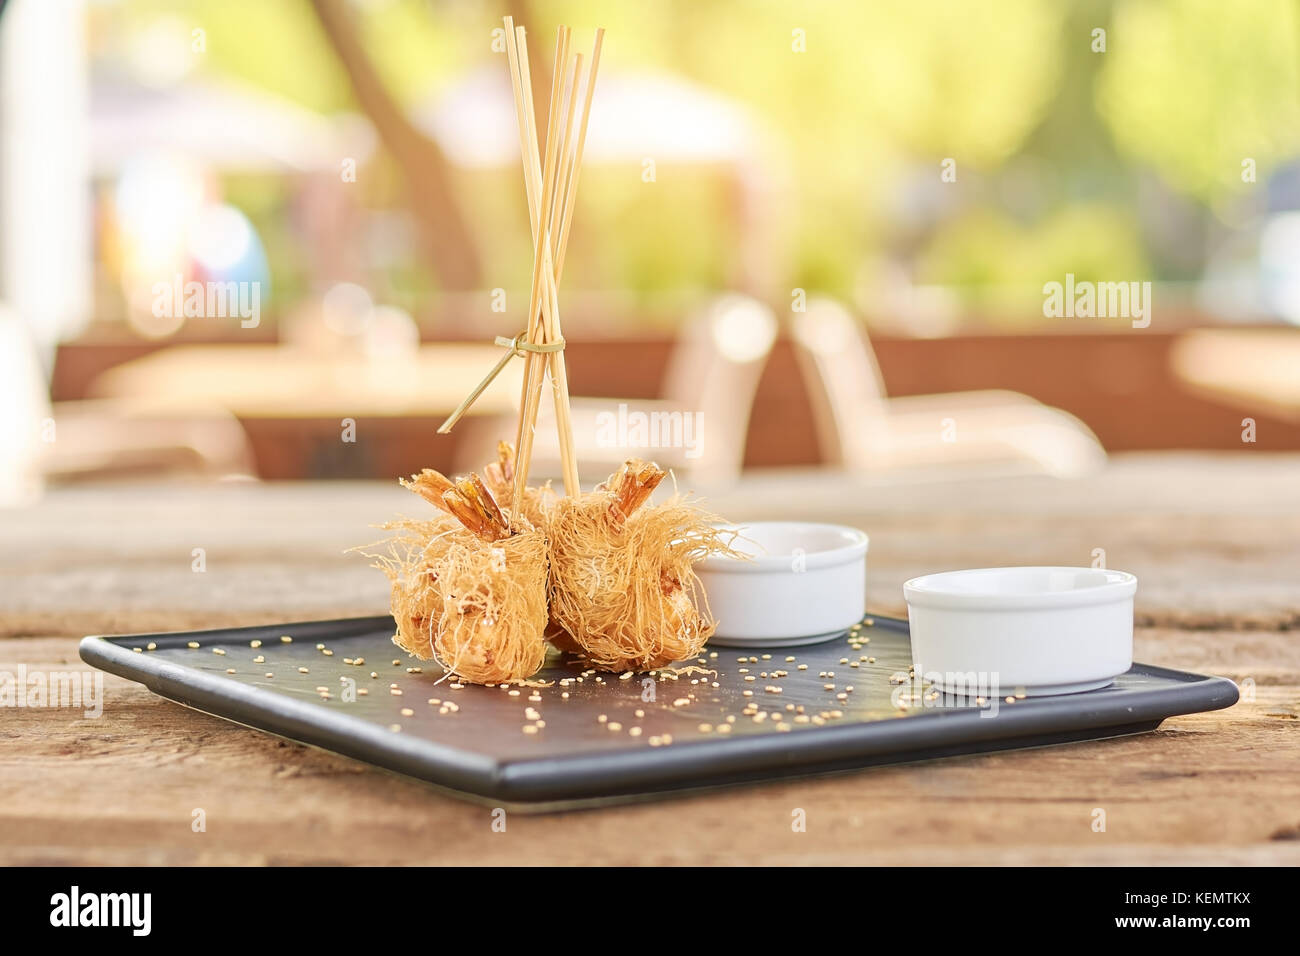 Crispy shrimps on blurred background. Shrimps wrapped in kataifi dough. Delicious food on plate. Stock Photo